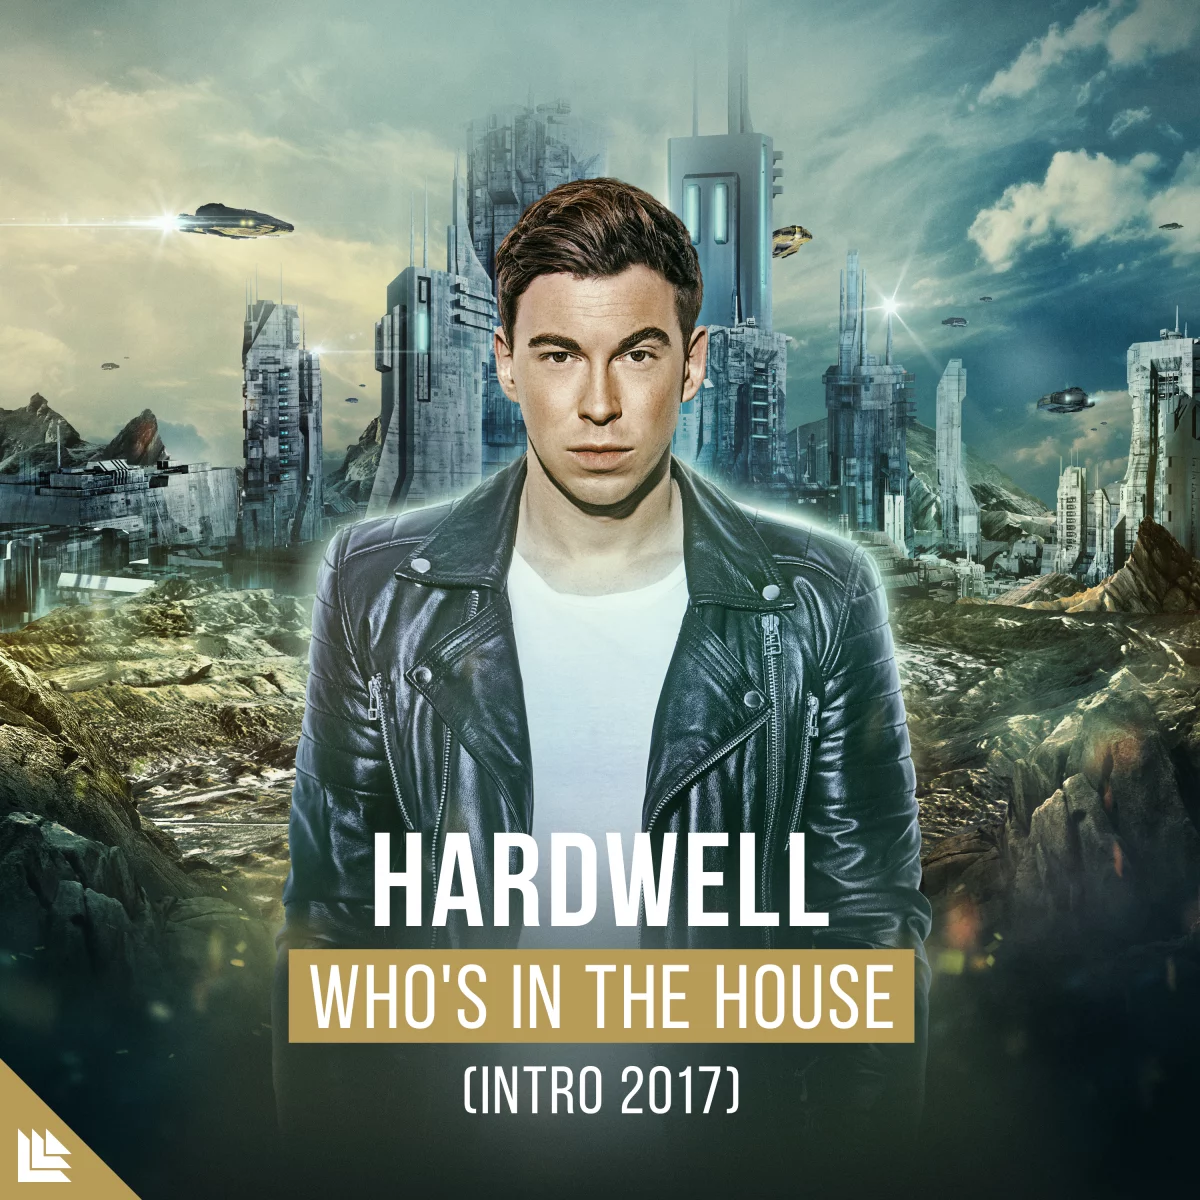 Who's In The House (Intro 2017) - Hardwell⁠ 